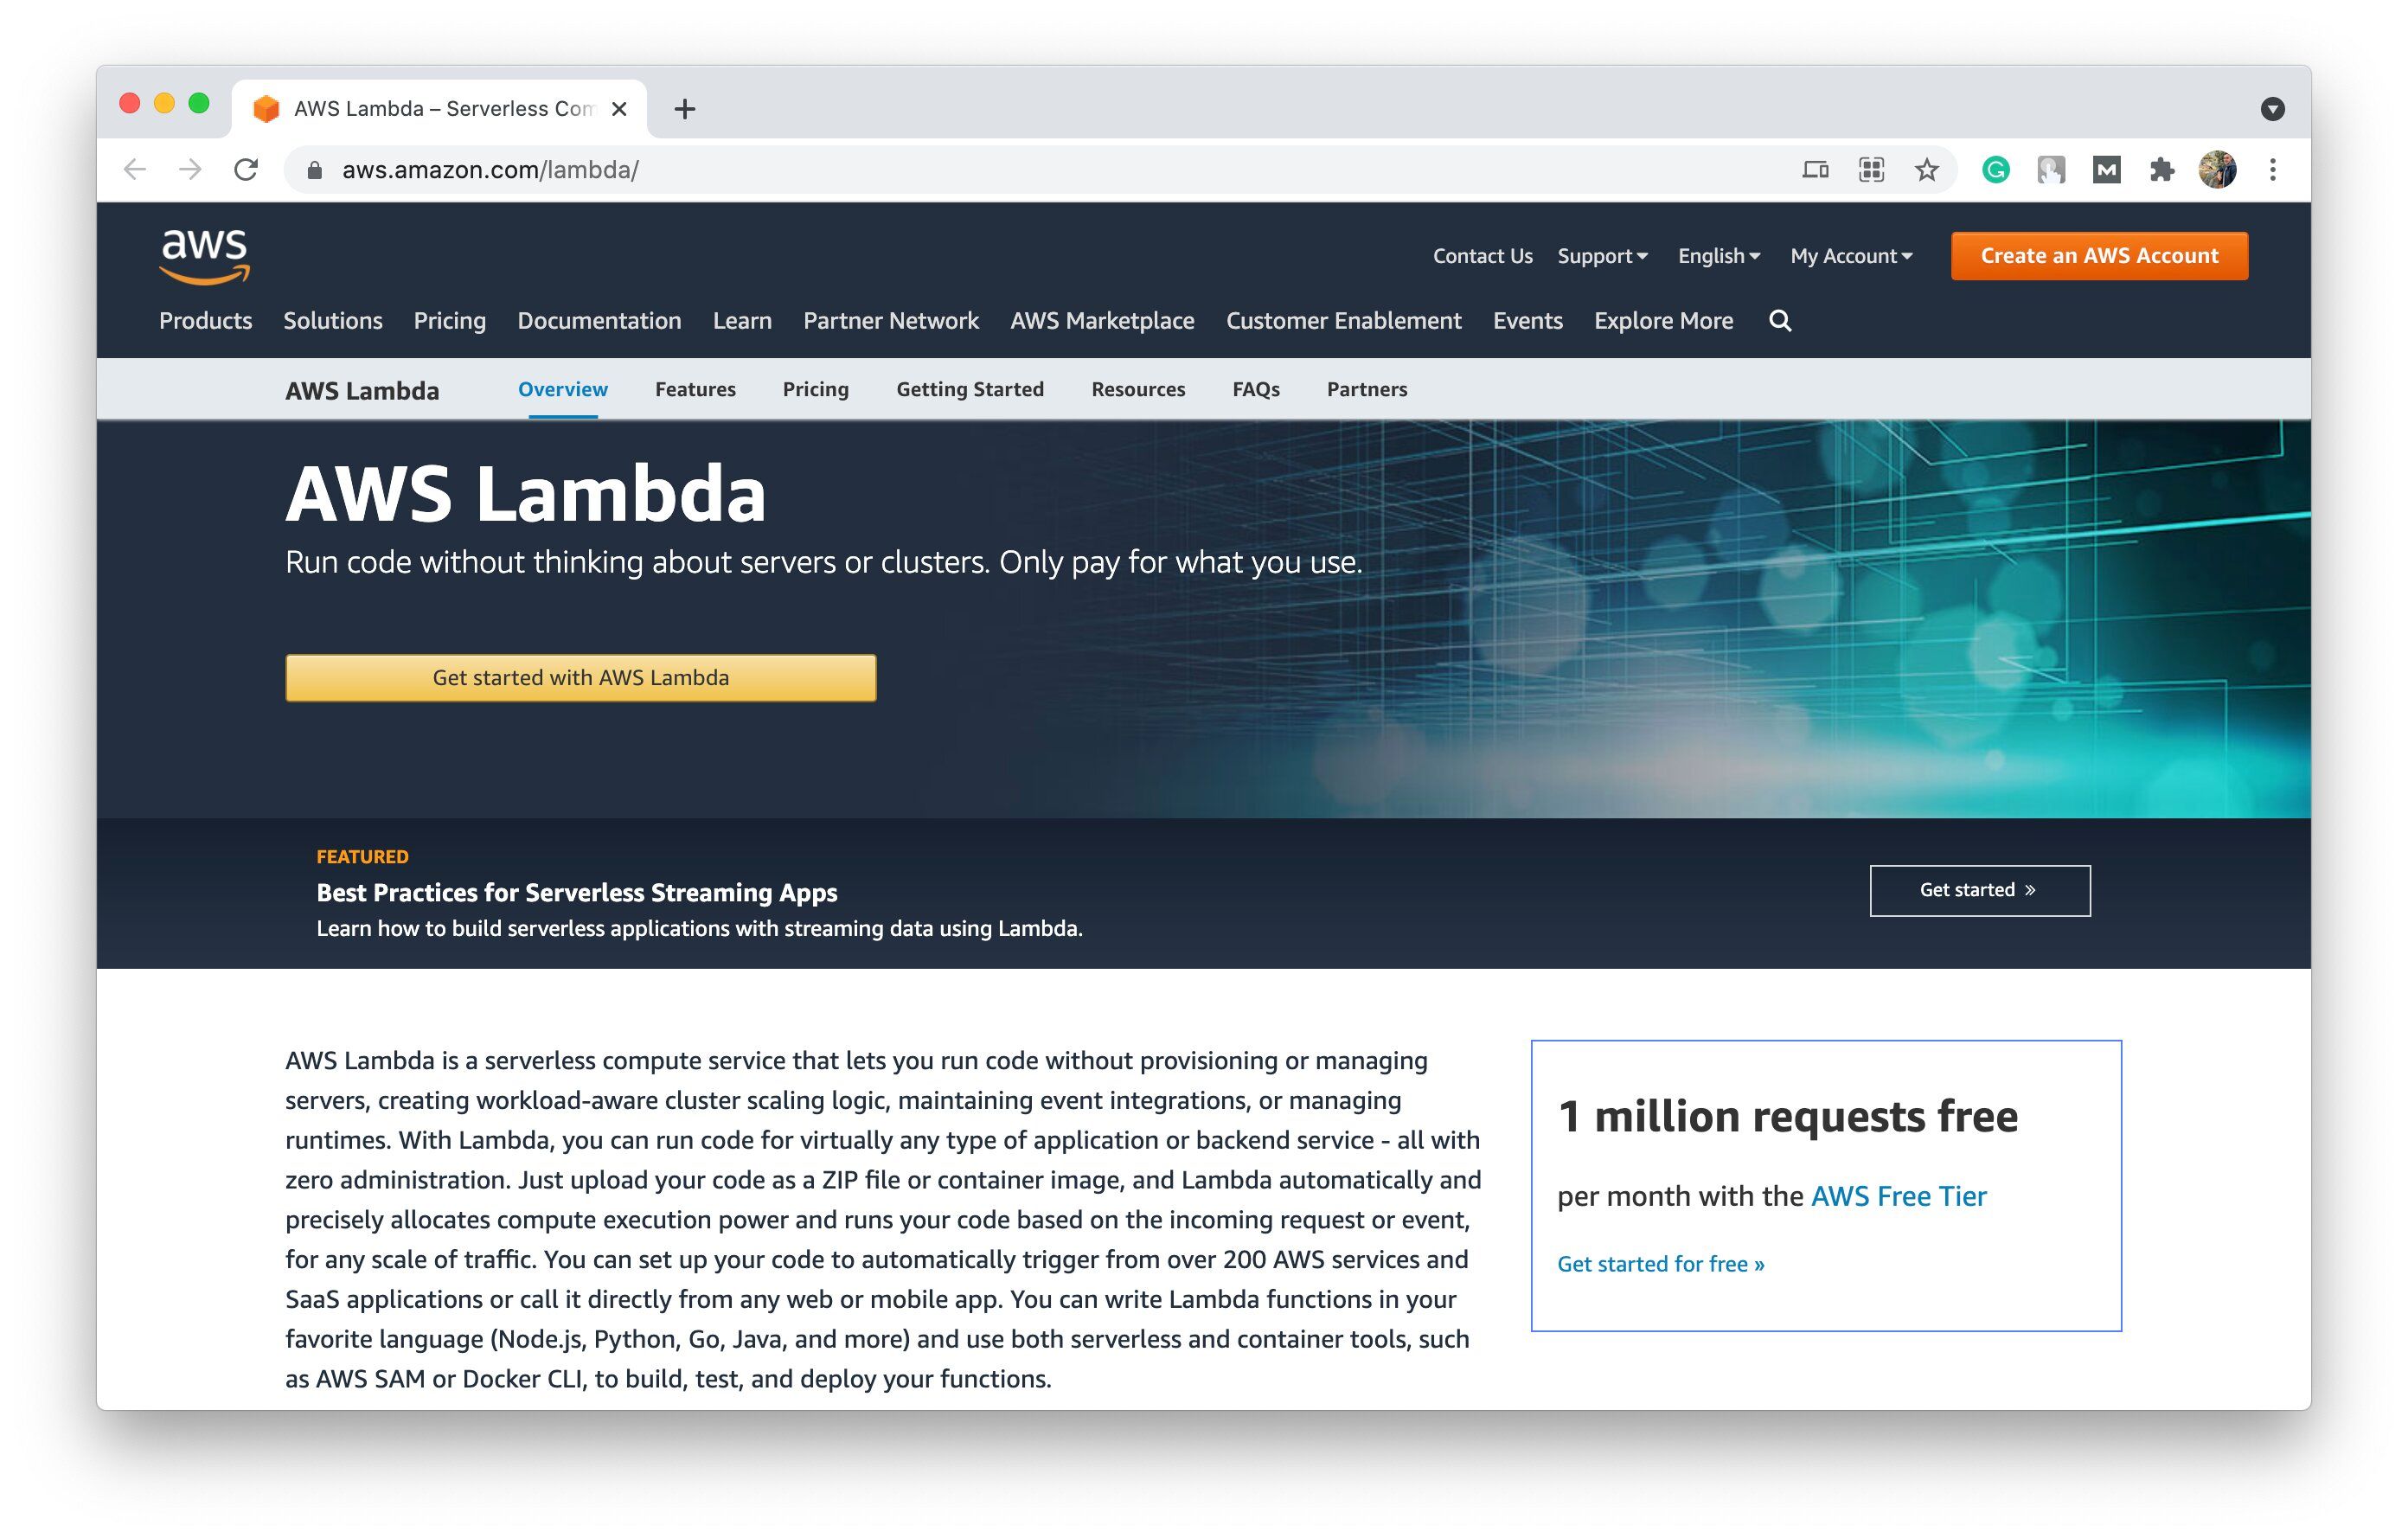 AWS Lambda is one of the most widely used serverless computing systems on the market that offers multiple additional tools for free (including cloud native ones) (*image by [AWS](https://aws.amazon.com/lambda/){ rel="nofollow" target="_blank" .default-md}*)